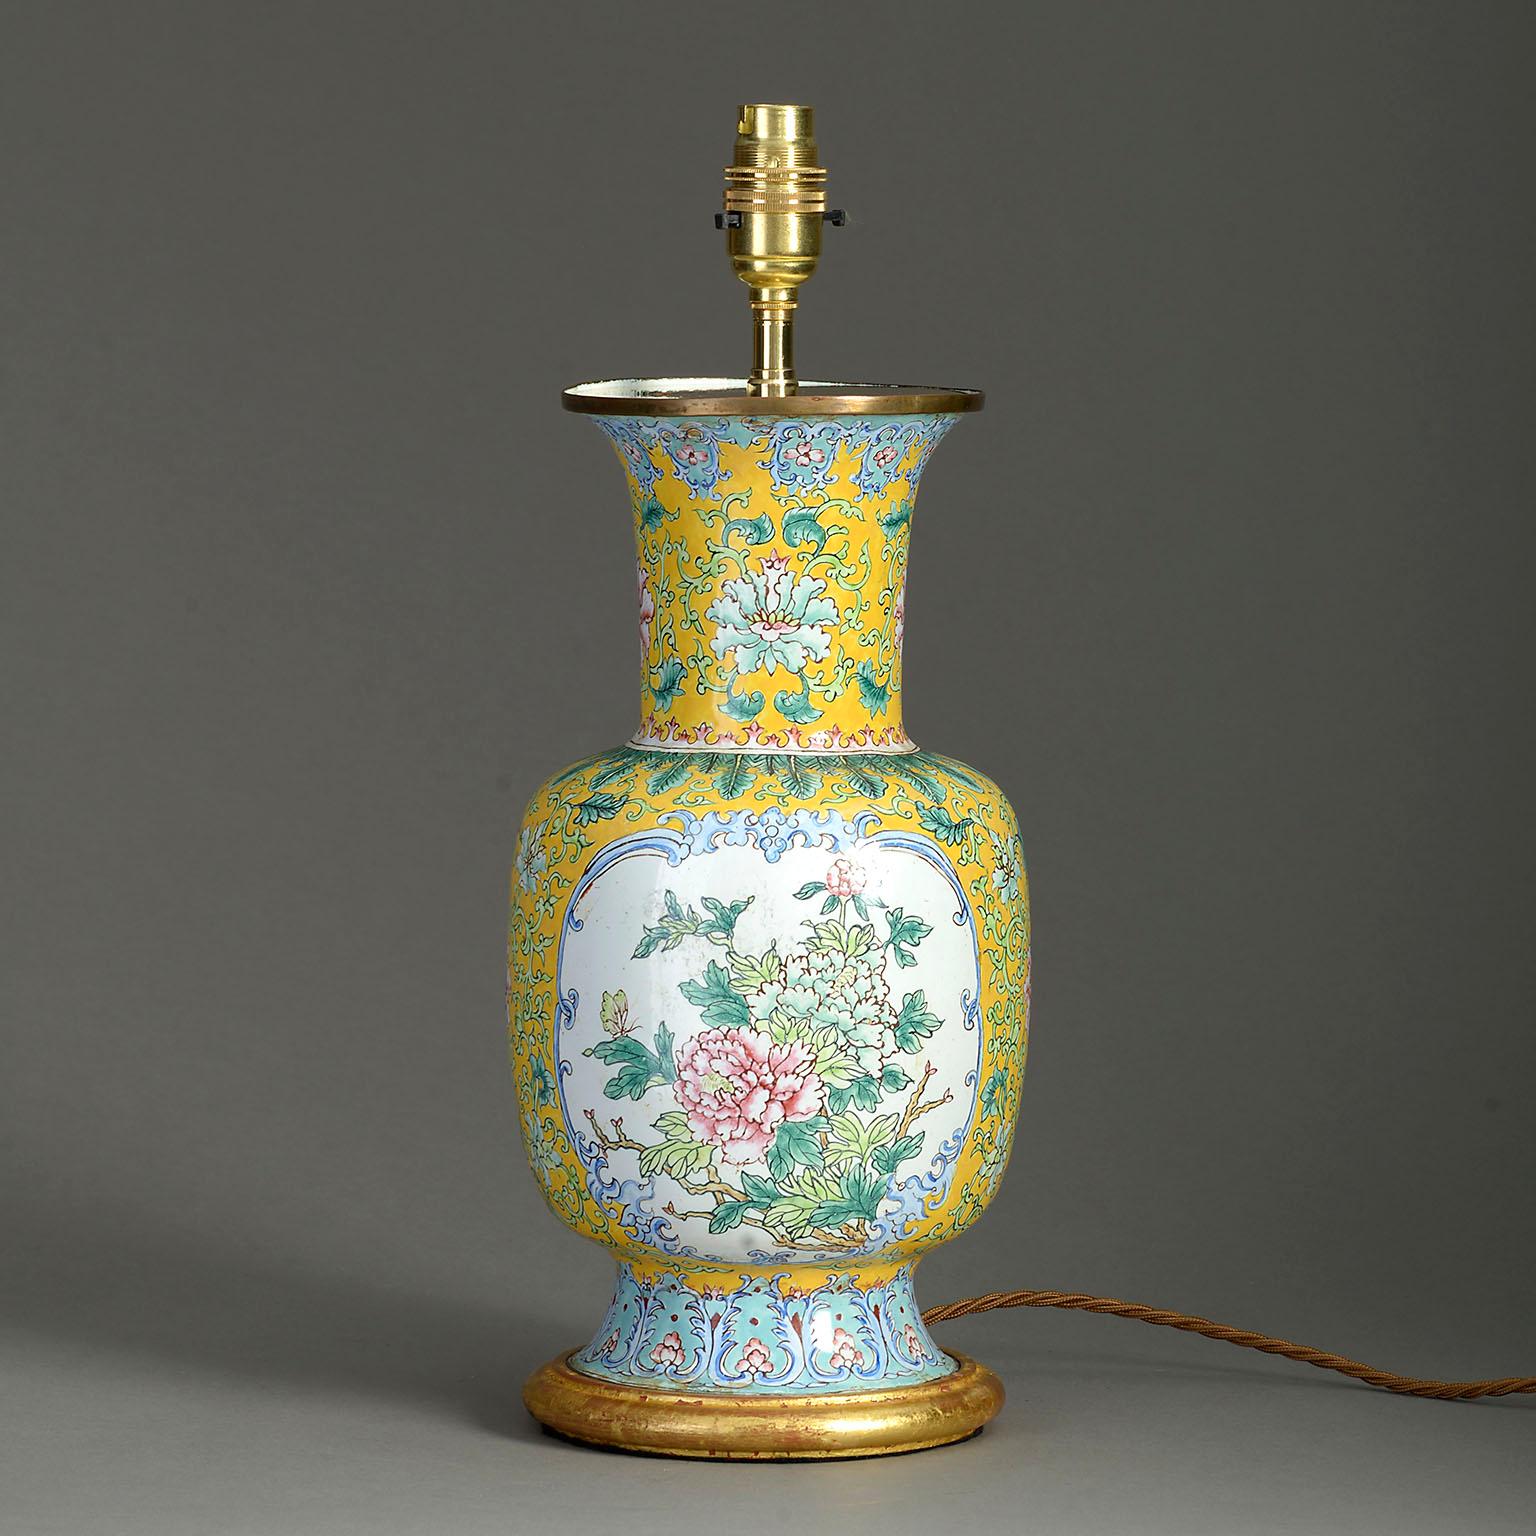 A mid-20th century Canton enamel vase of baluster form, the Imperial yellow ground with scrolling foliage and set with floral cartouches, mounted as a table lamp on a hand-turned water gilded base.

Republic Period.

Dimensions refer to size of